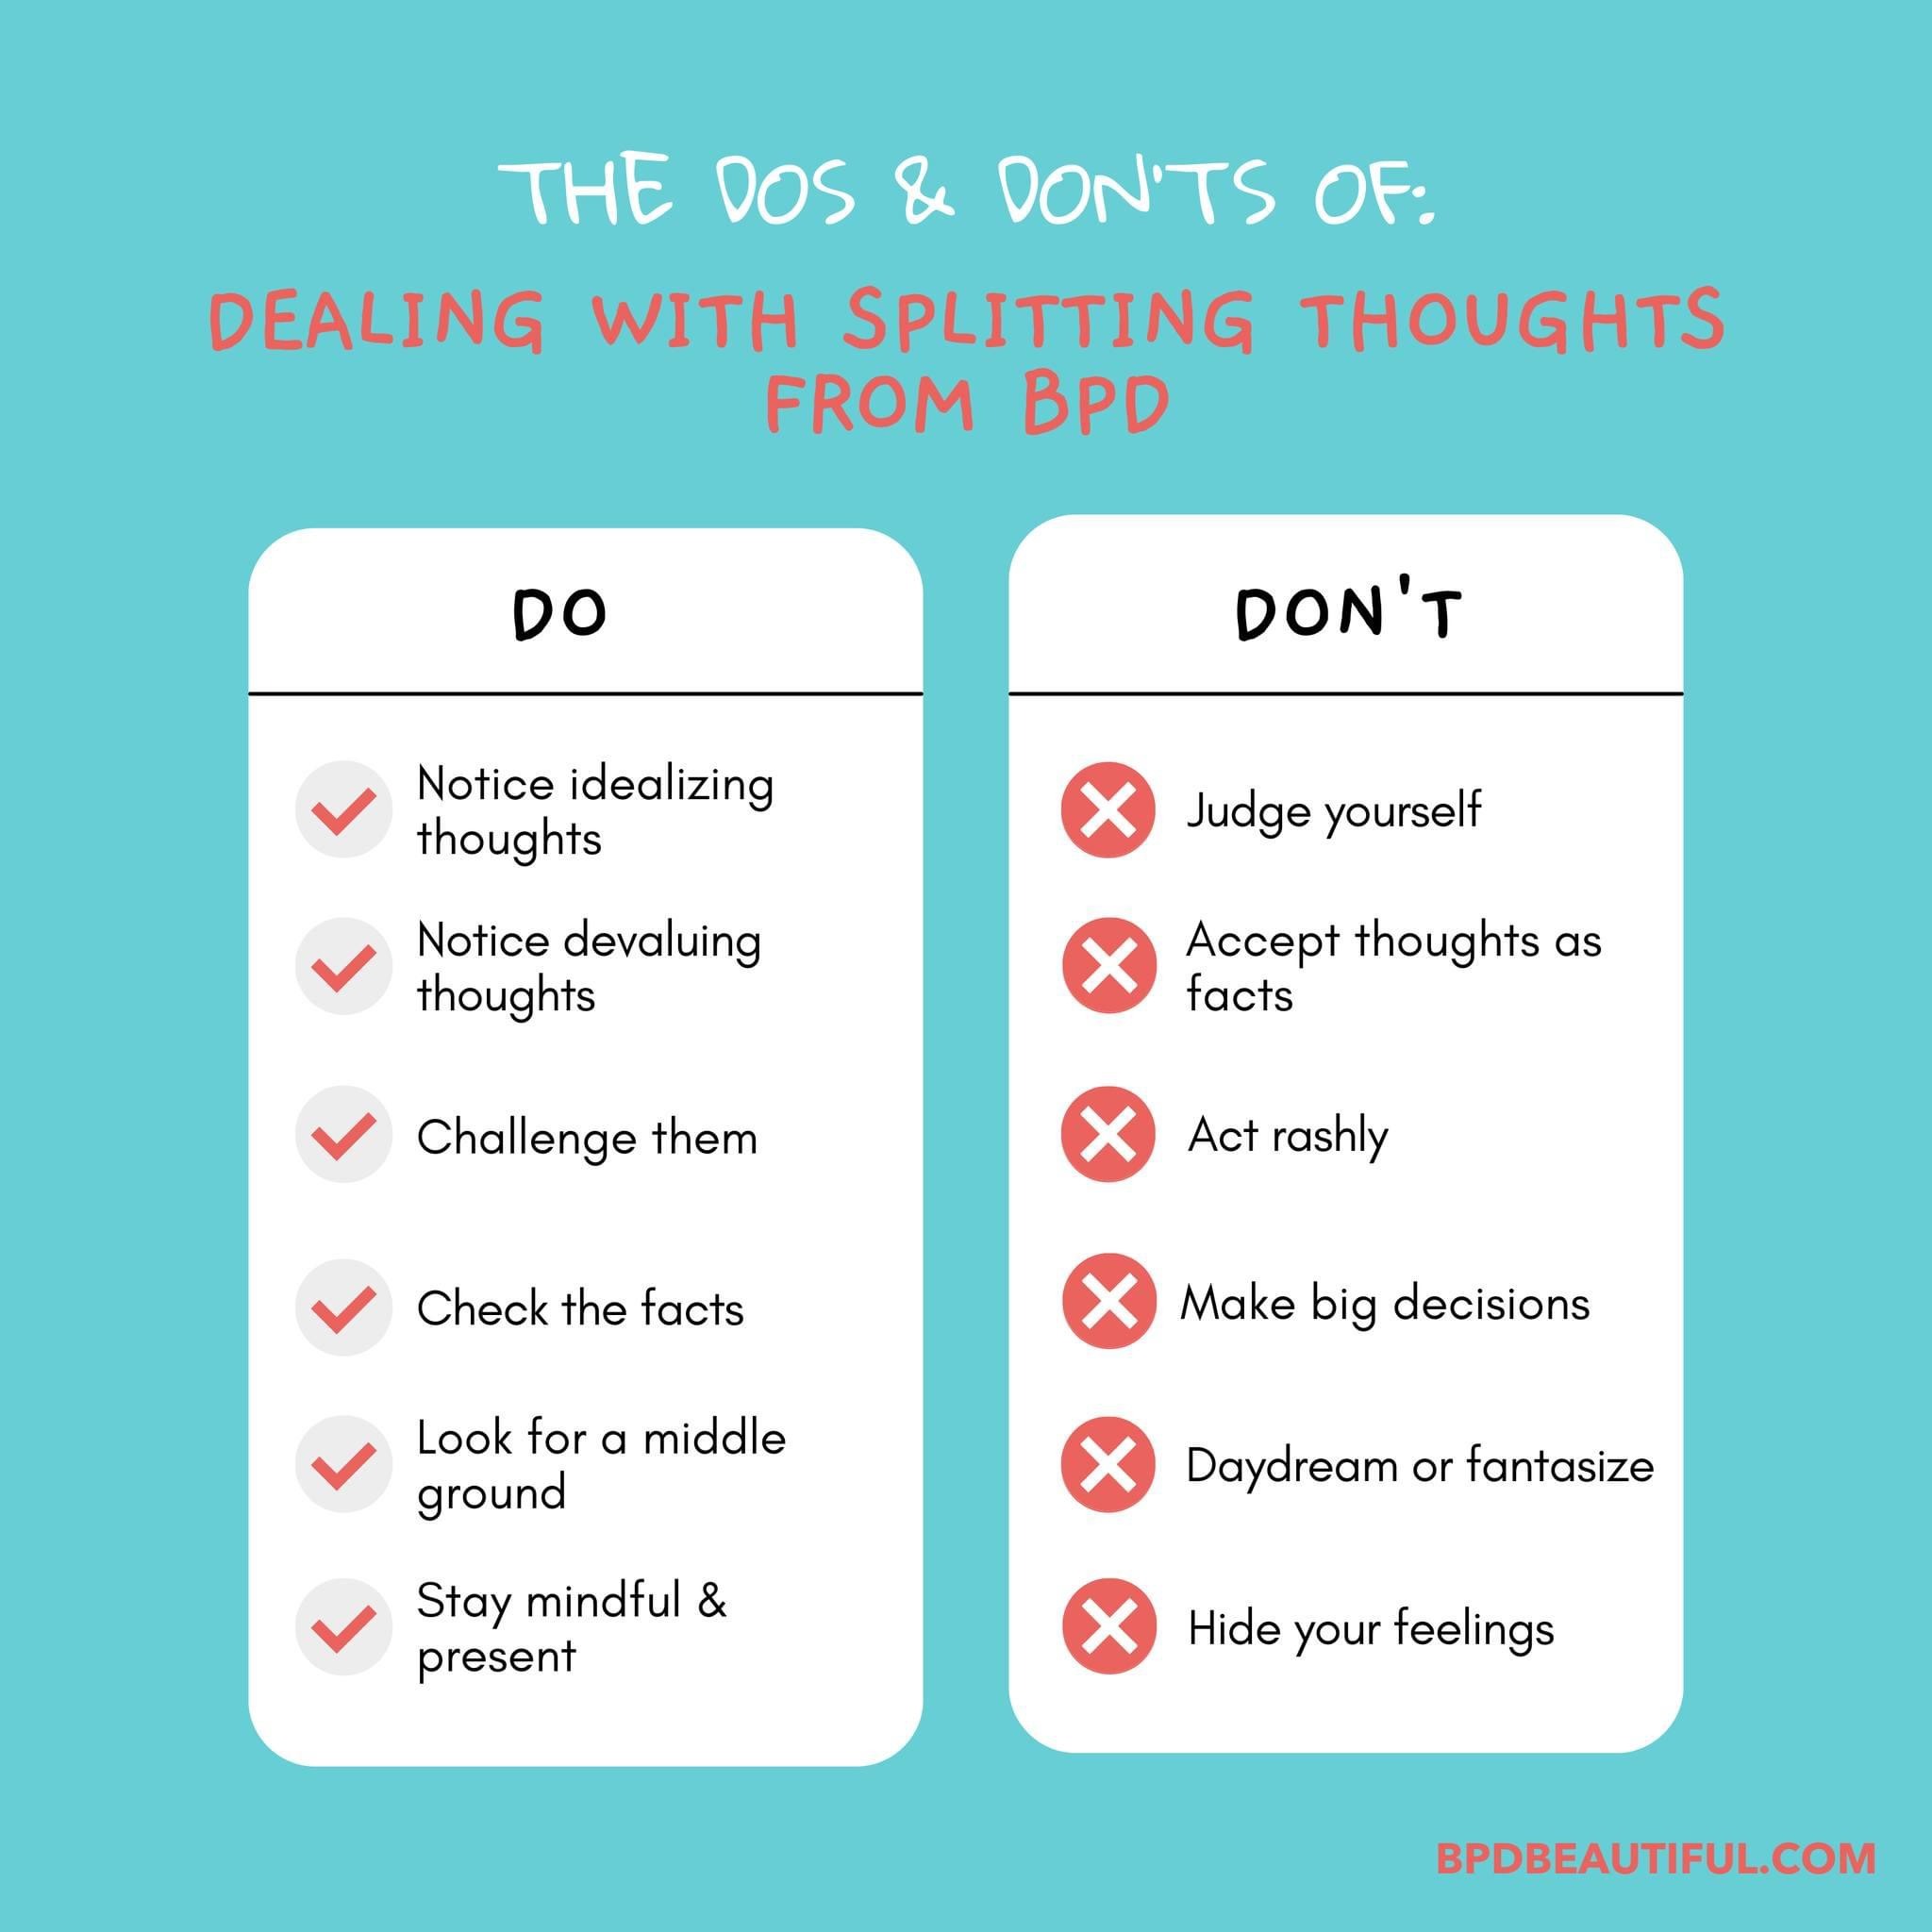 how to deal with bpd splitting thoughts: do's and don'ts. graphic from bpd beautiful's instagram